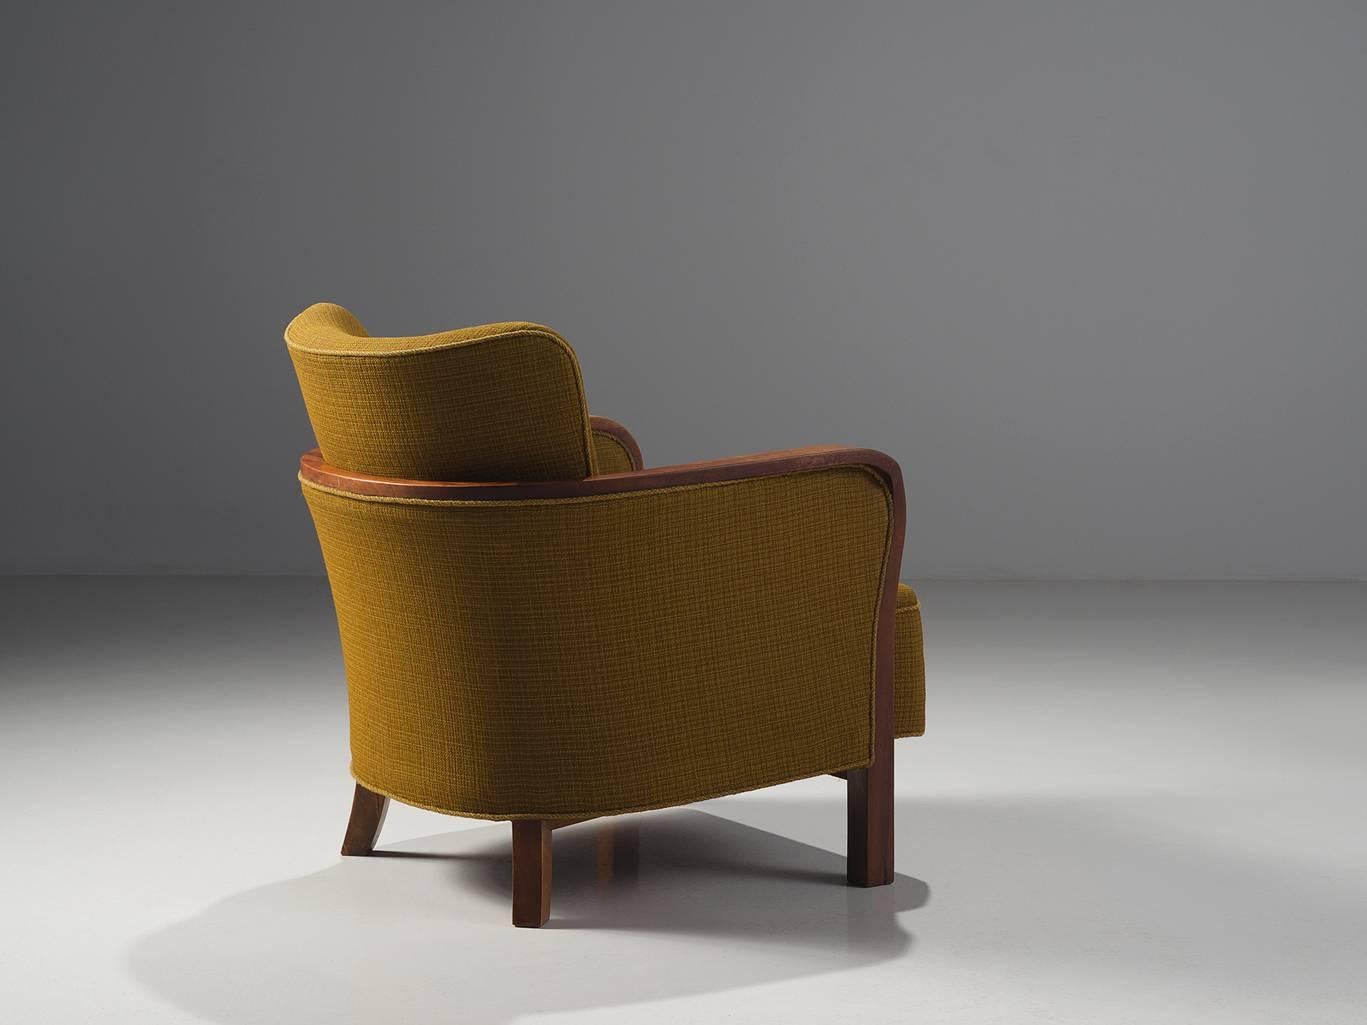 Easy chair, ocre fabric, stained beech legs, Denmark, 1940s. 

This Danish wingback chair is upholstered with the original ocre fabric that shows. The solid oak frame is sculptural and curved and flows organically into the armrests. The back is also